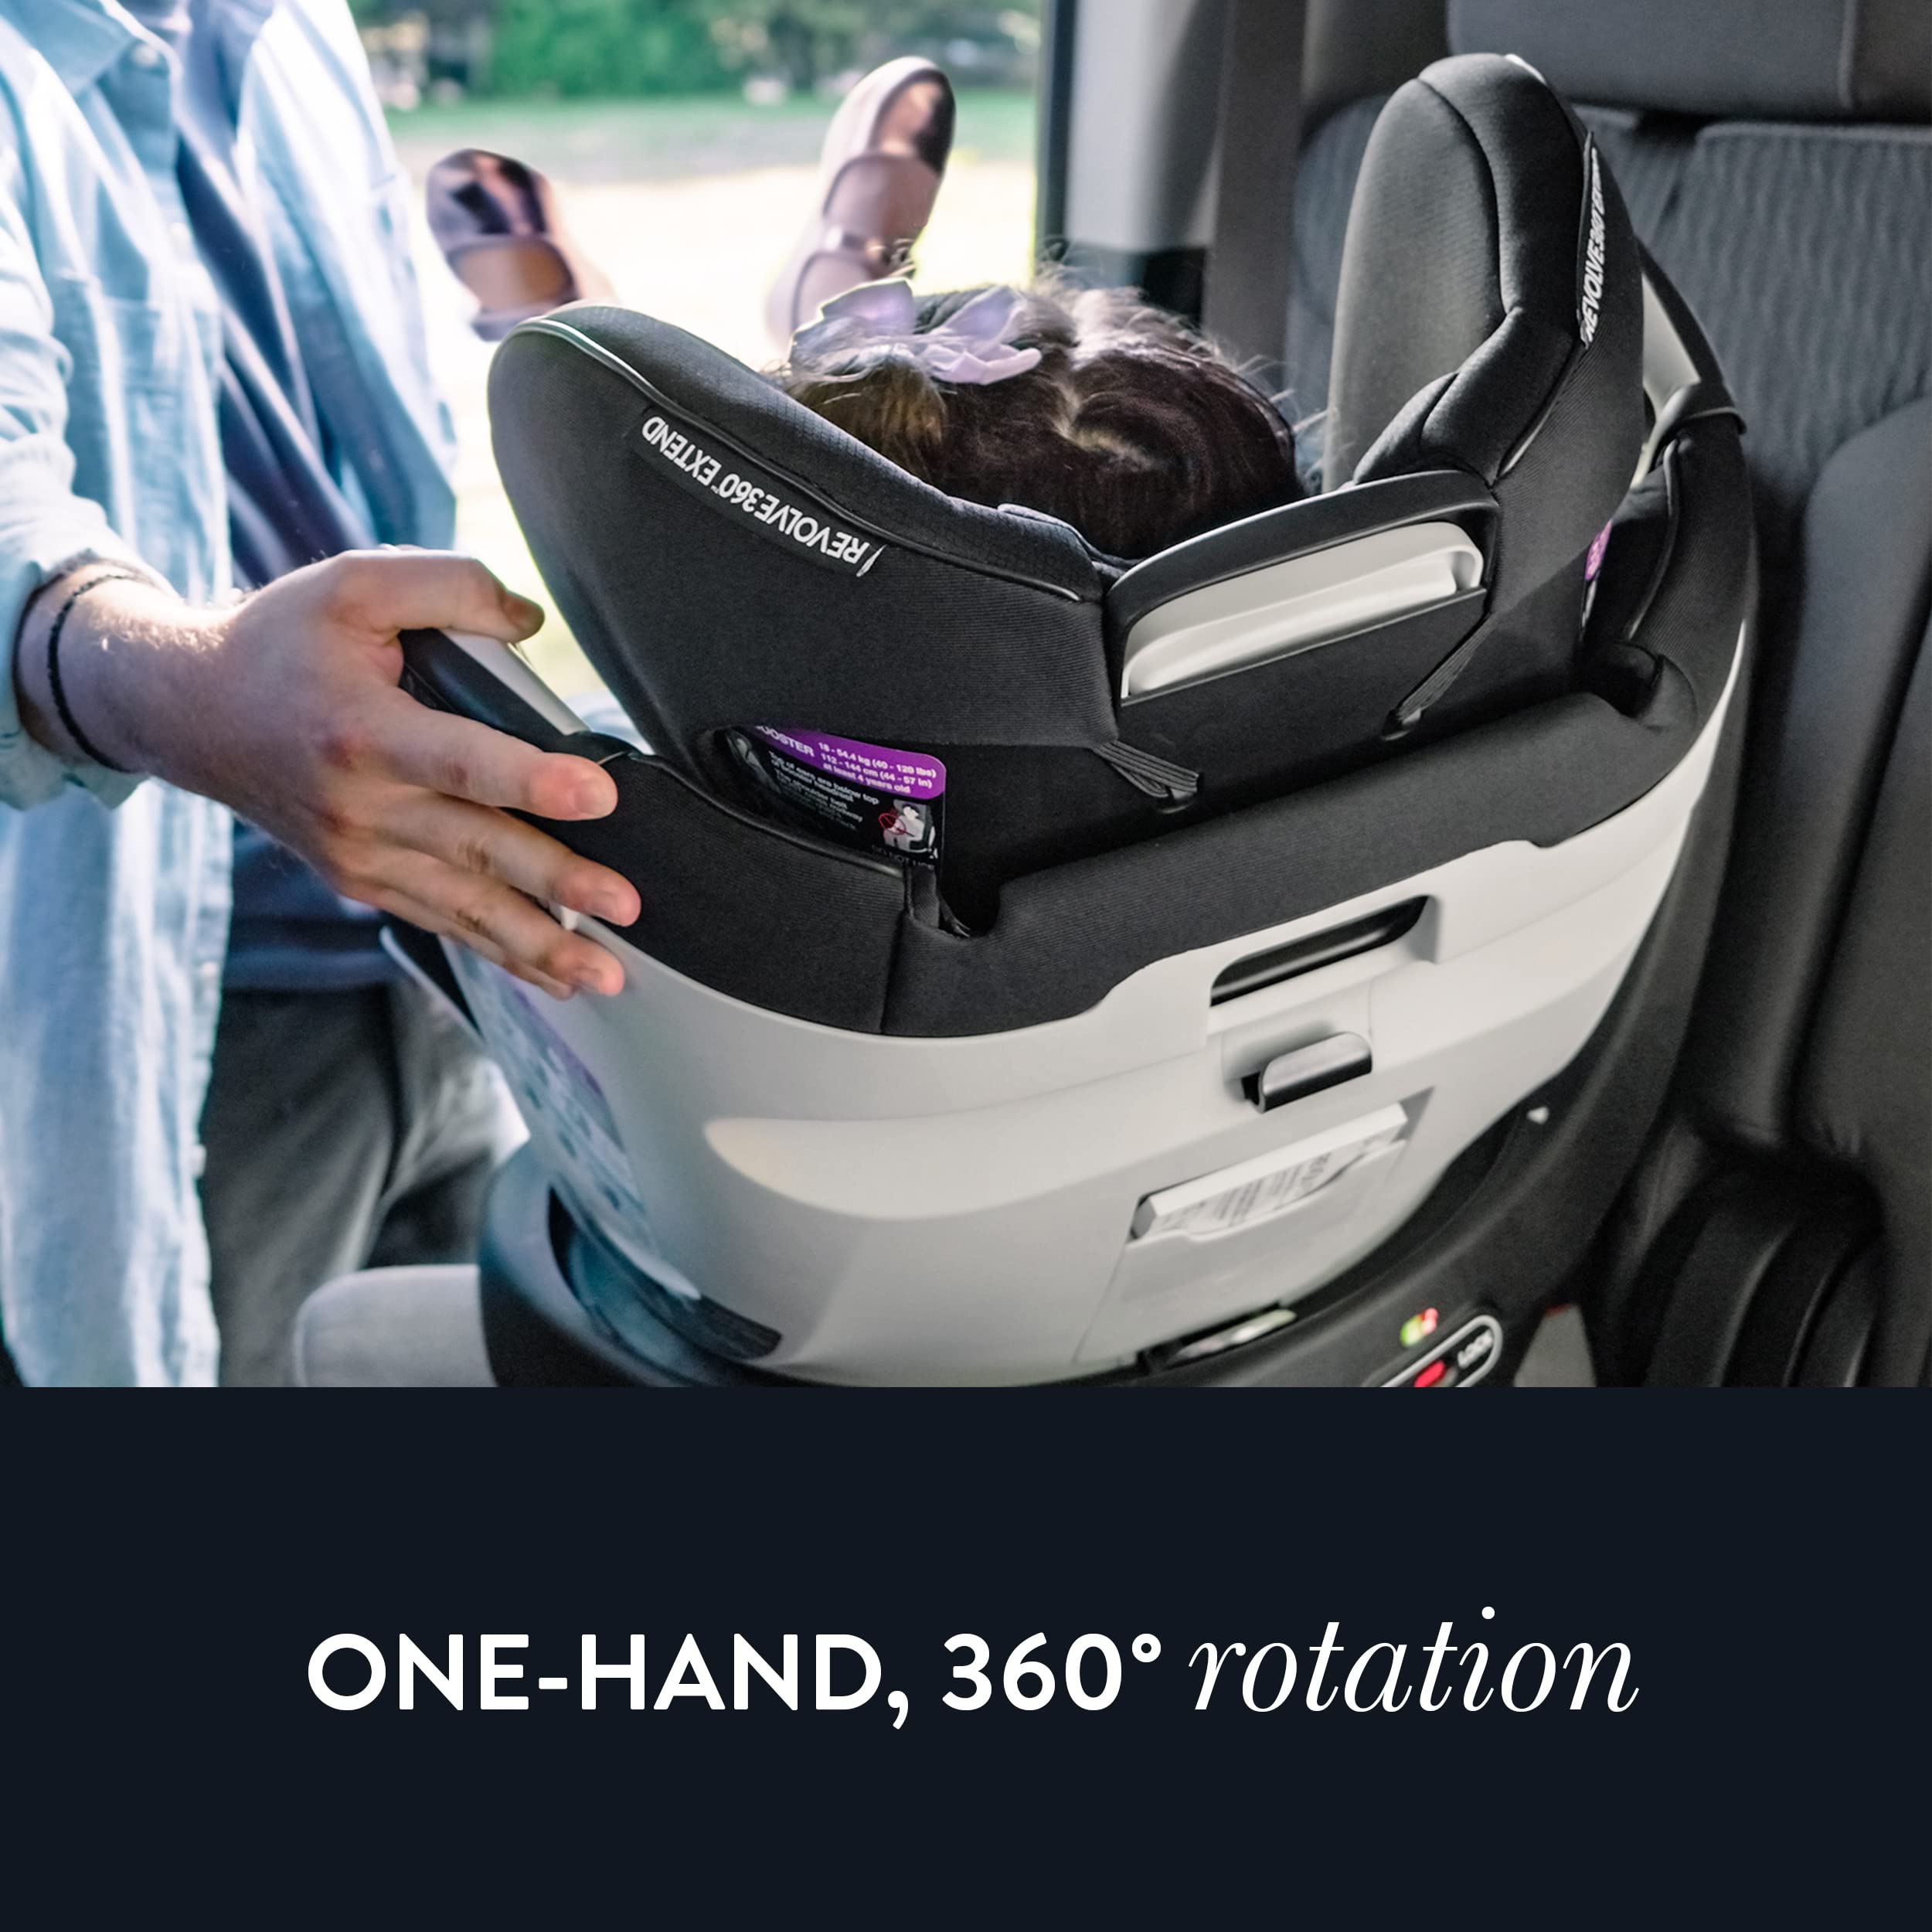 Evenflo Gold Revolve360 Extend All-in-One Rotational Car Seat with SensorSafe (Opal Pink)